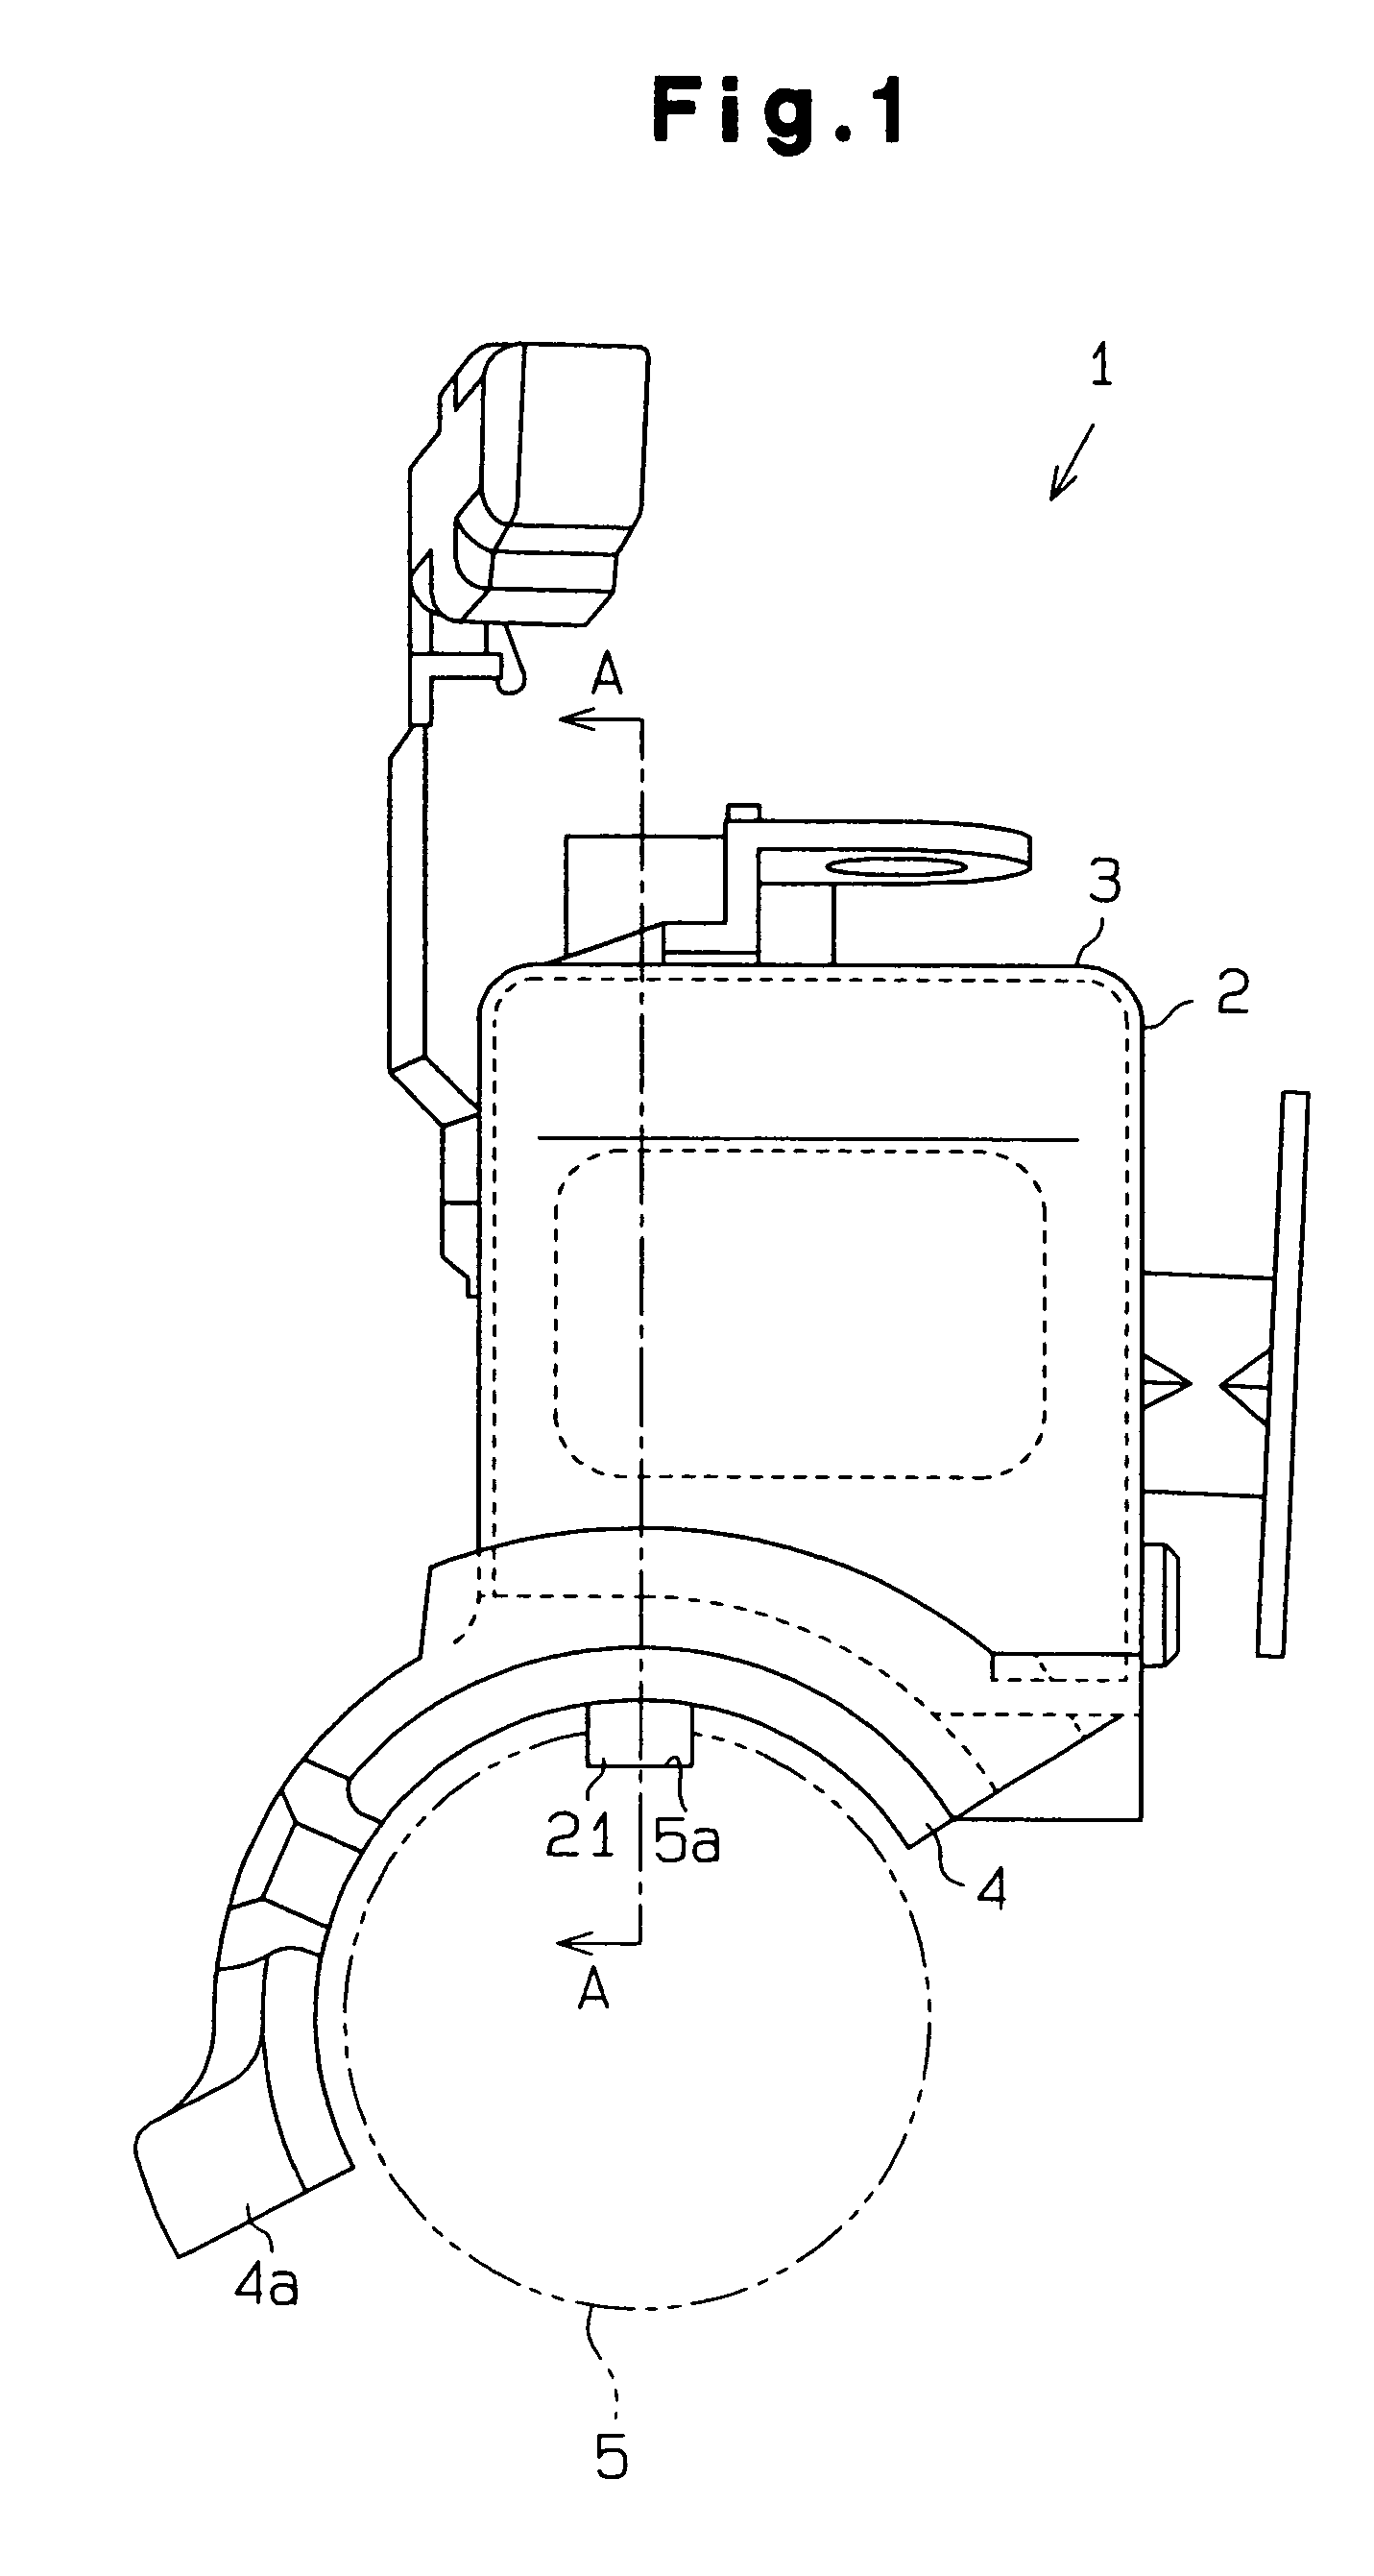 Electronic vehicle theft preventive device